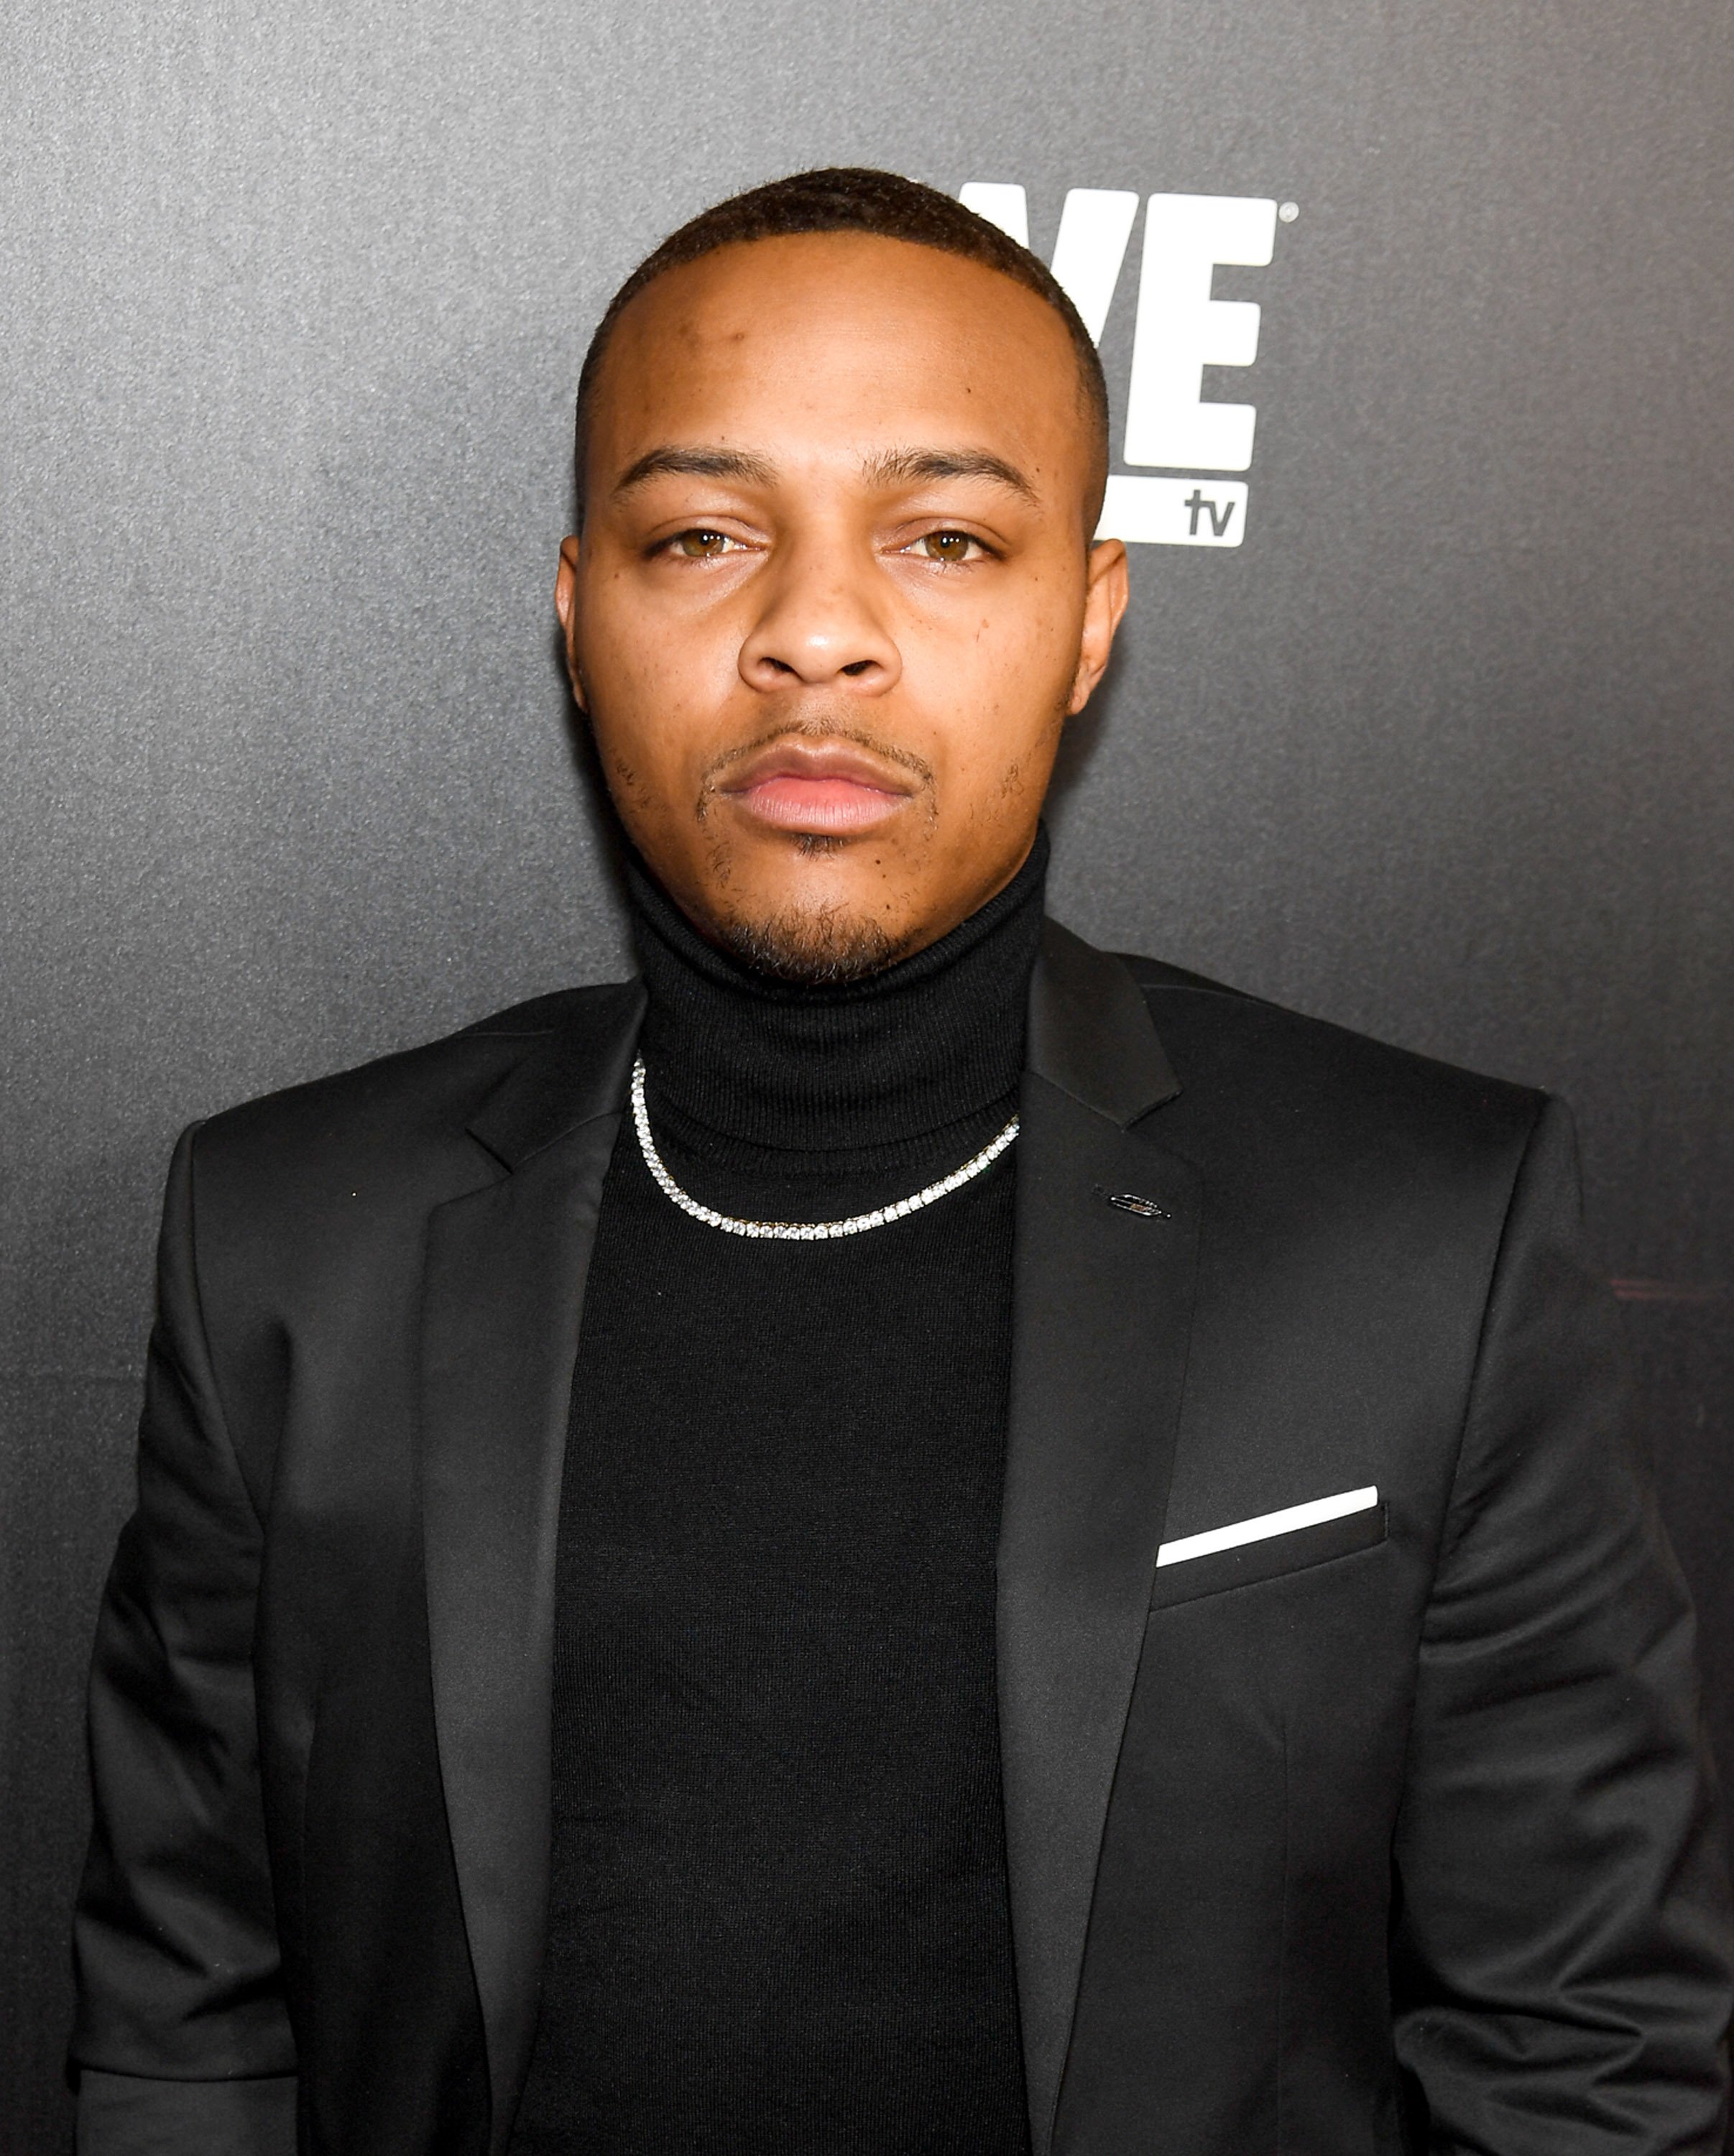 Bow Wow at the "Growing Up Hip Hop Atlanta" season 2 premiere party, 2018 in Atlanta, Georgia | Photo: Getty Images